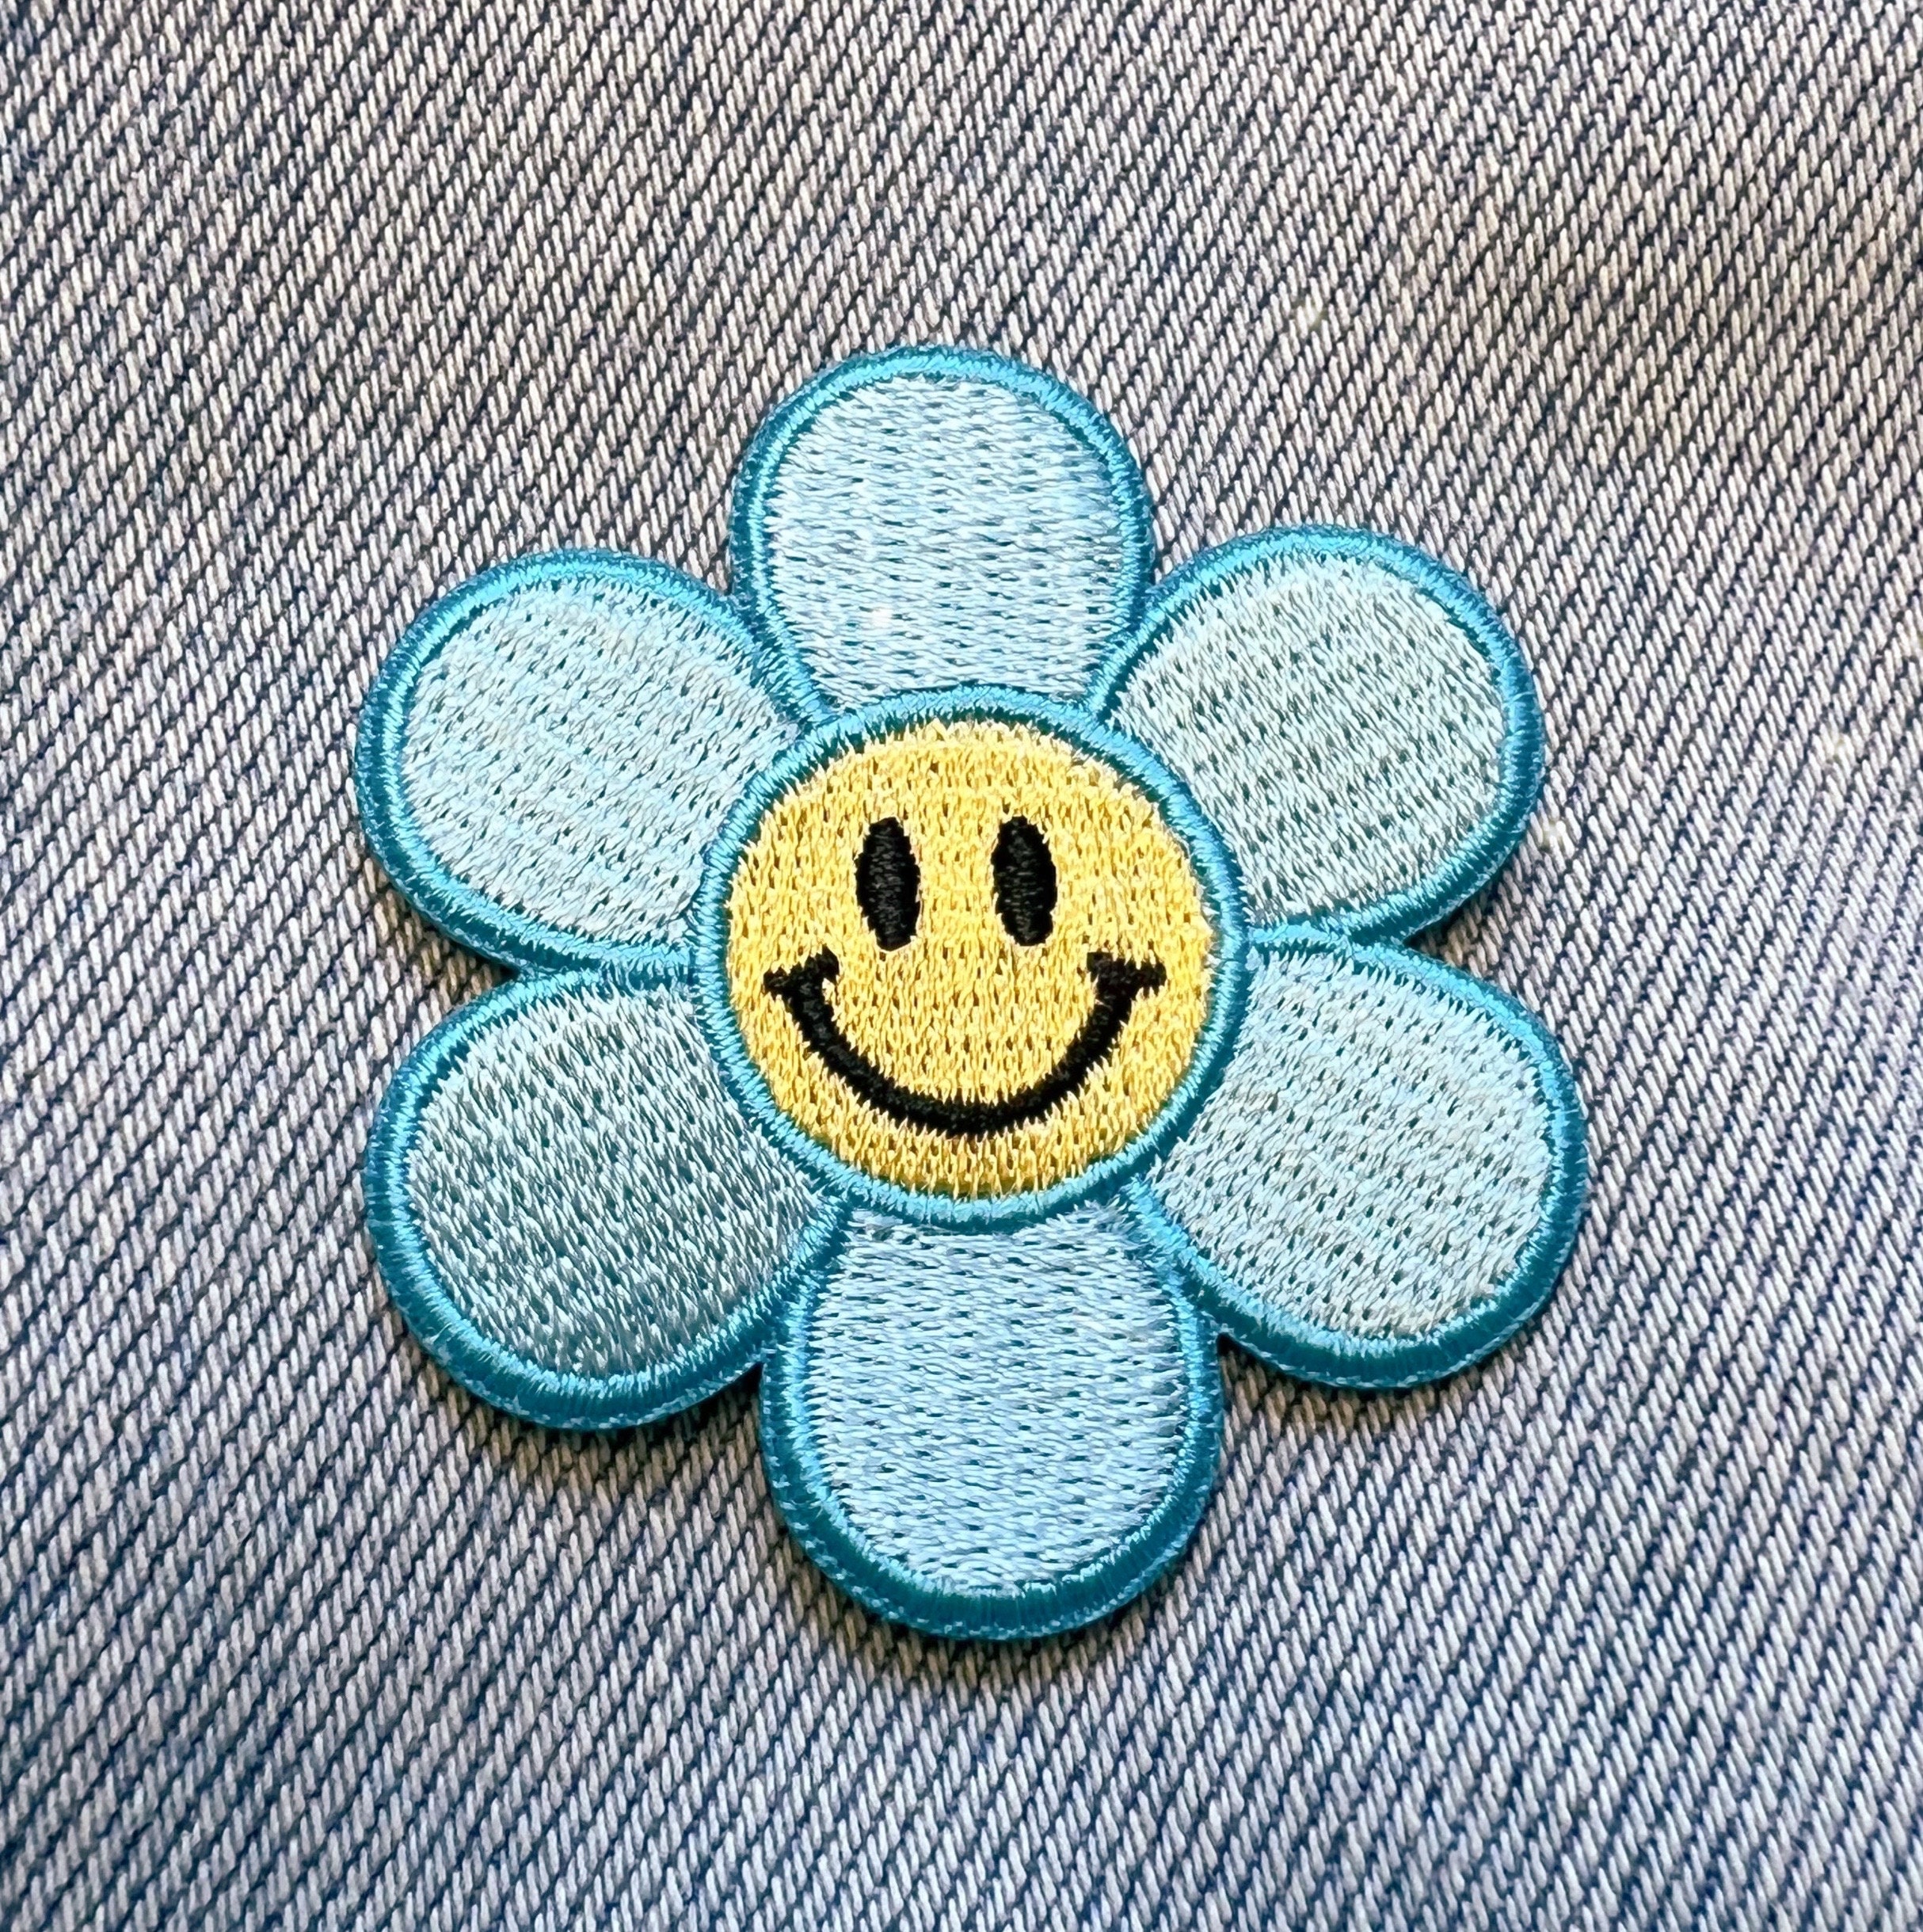 Smiley Daisy Patch Embroidered Patches for Jackets - Etsy